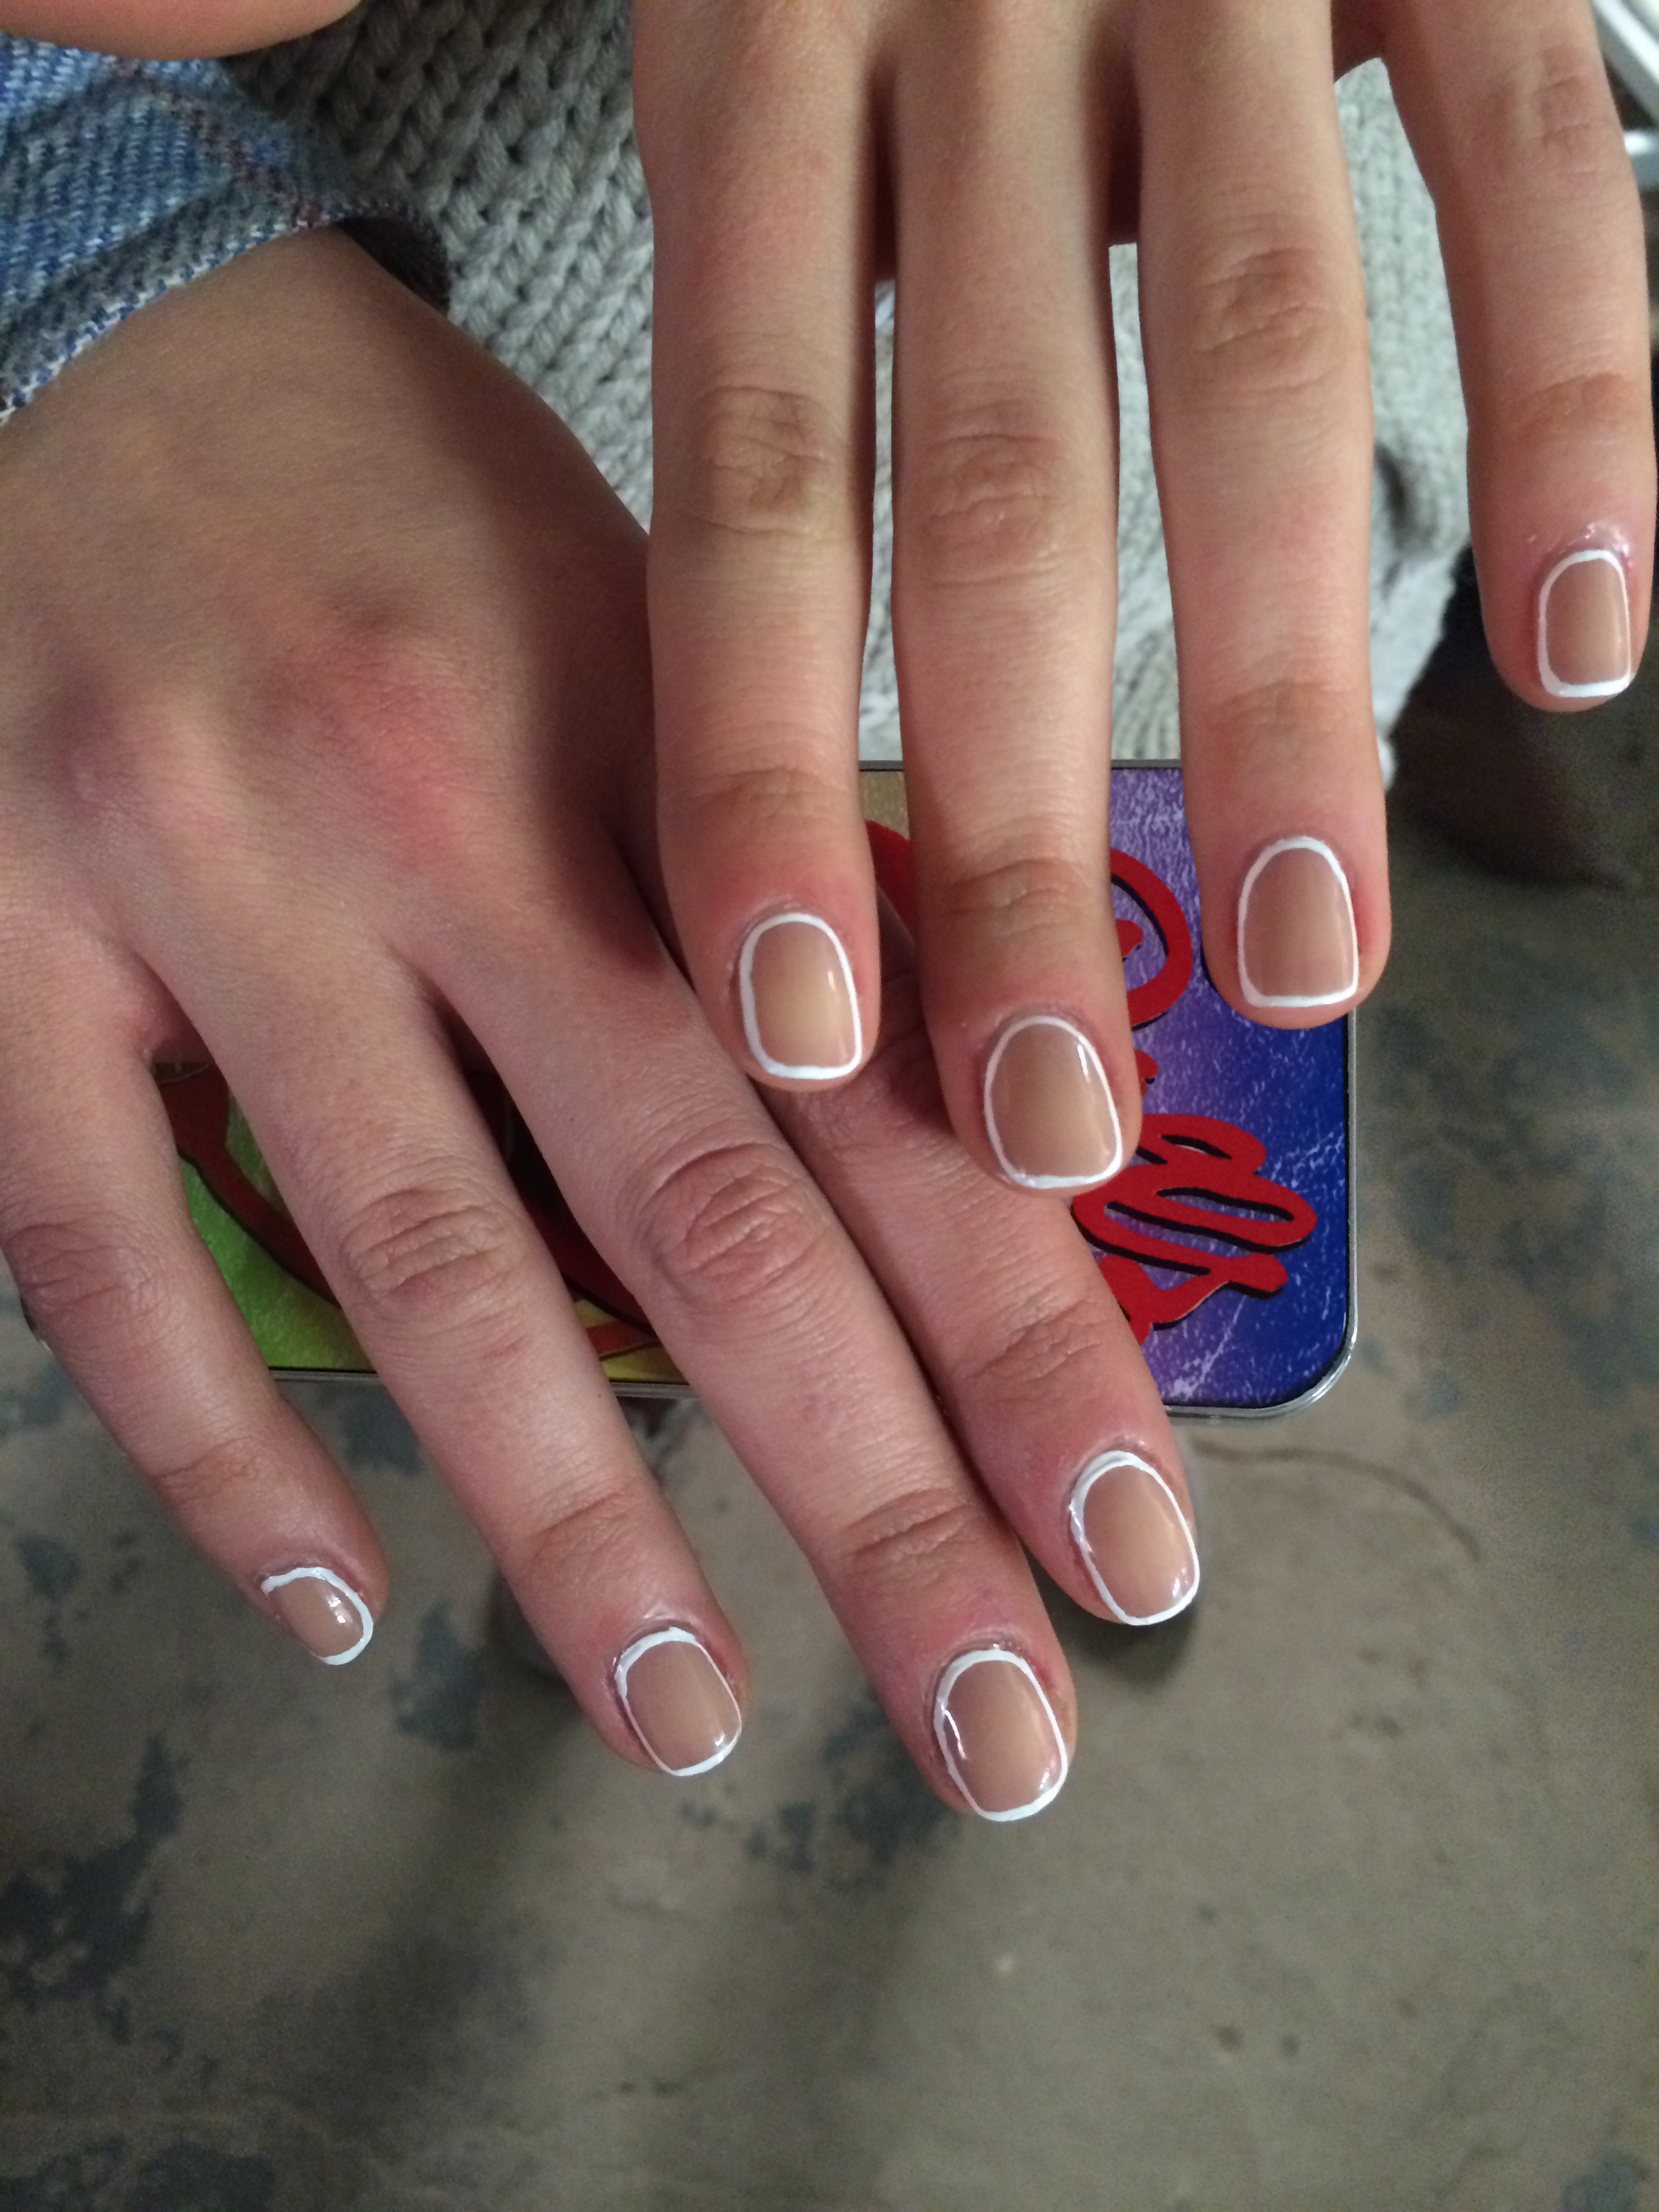 How to Do a New French Manicure | StyleCaster